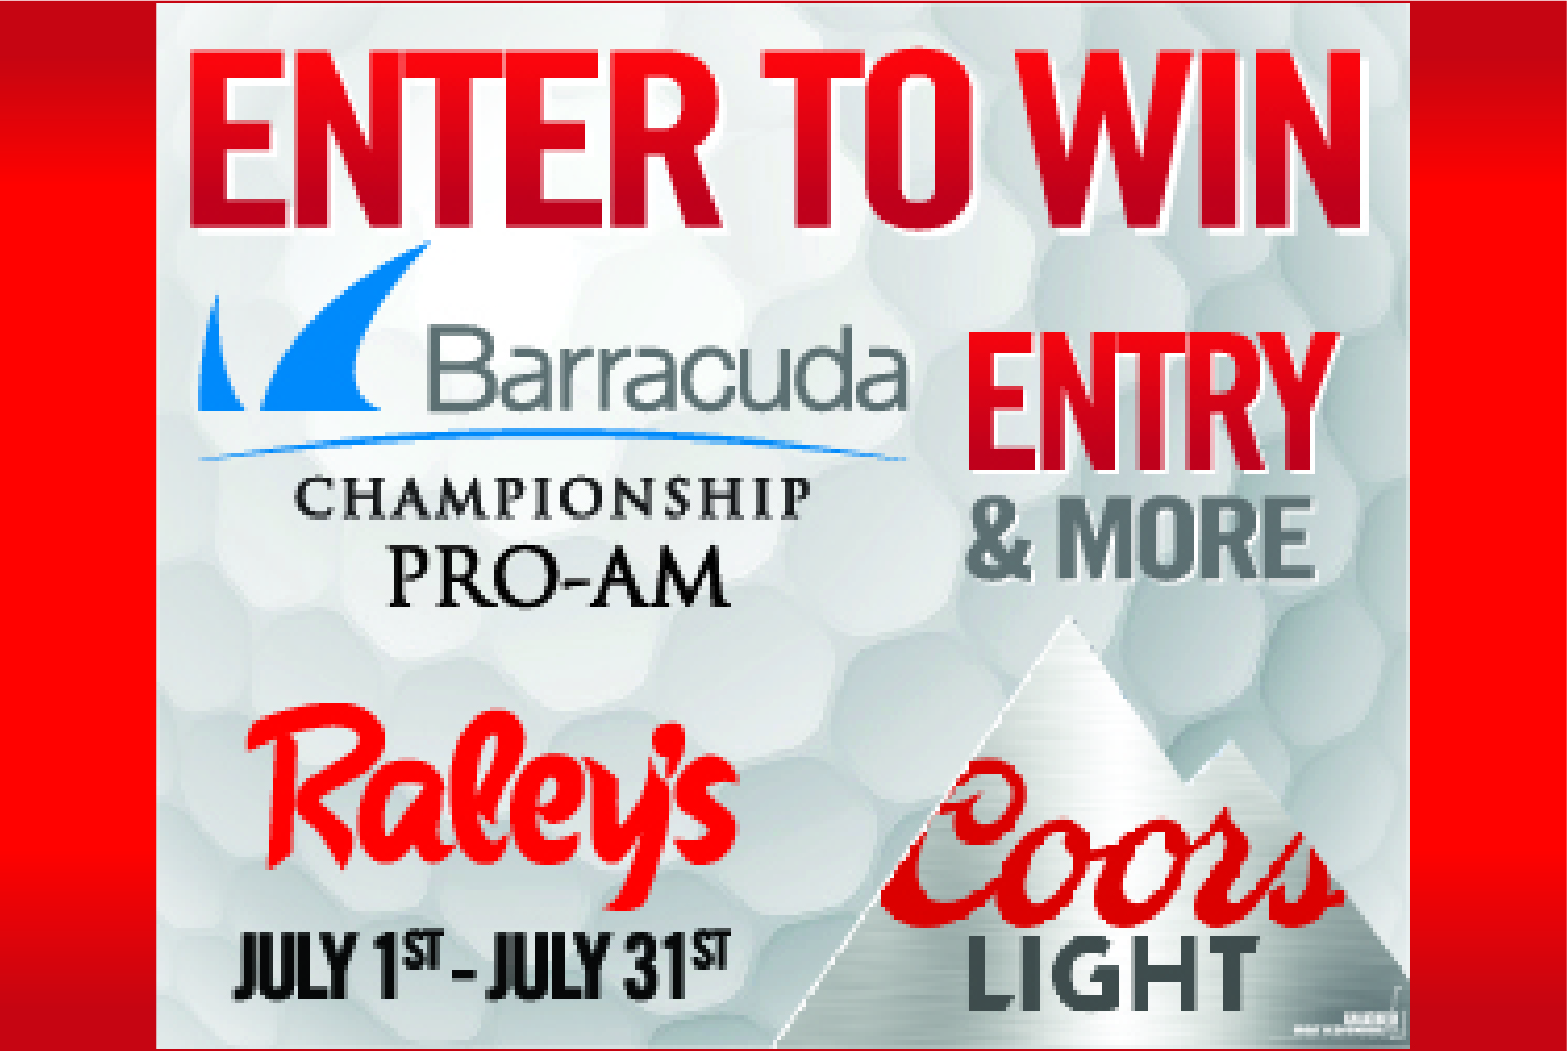 Enter to win golf giveaway at raleys 